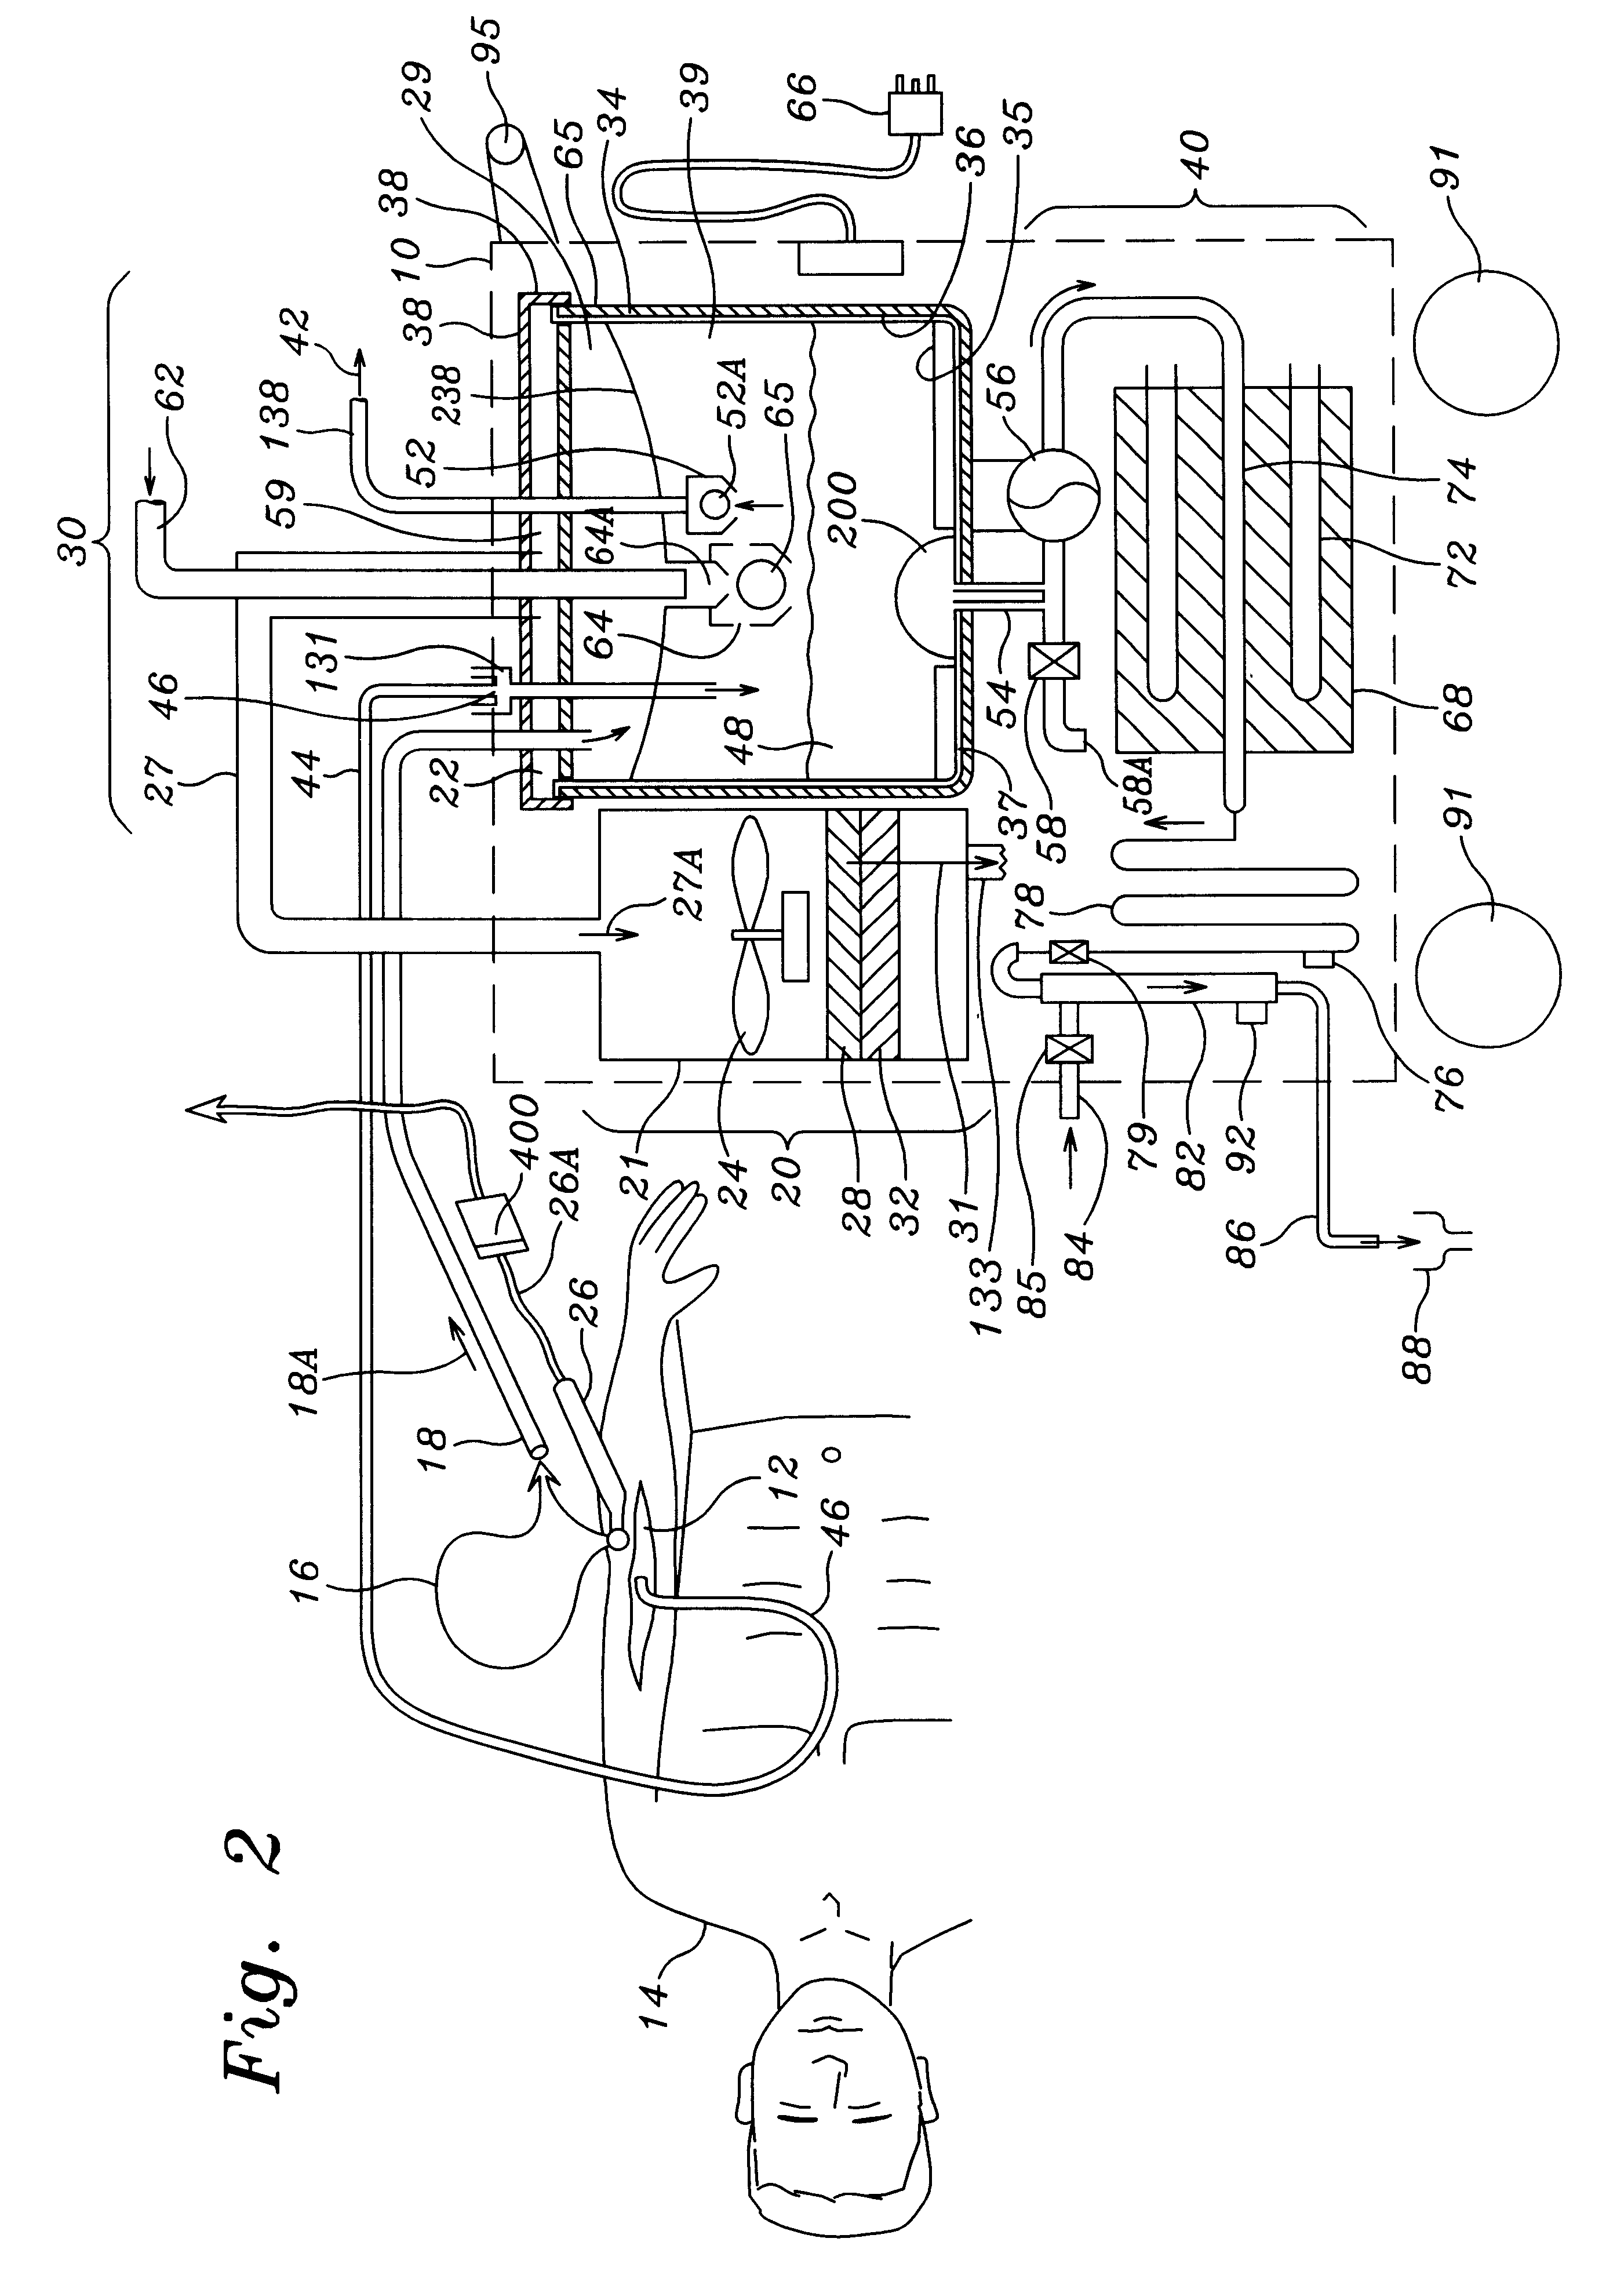 Surgical waste liquid and smoke disposal system